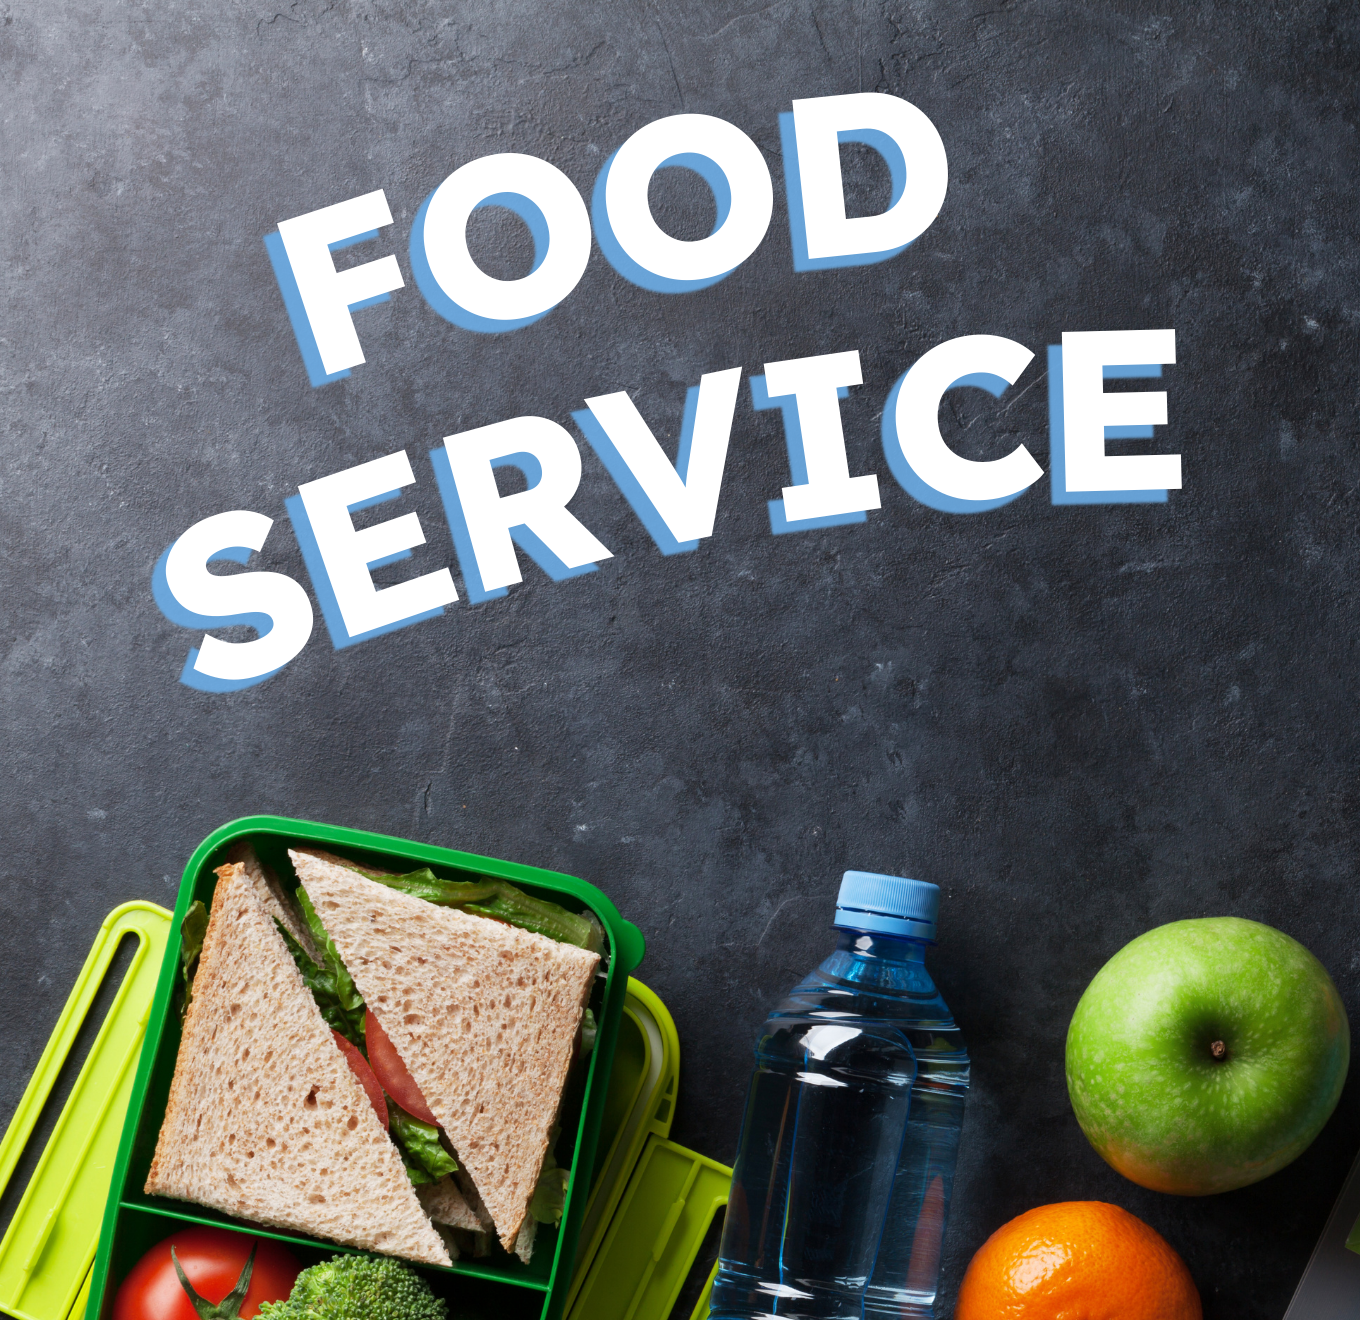 Visit our food service department page.